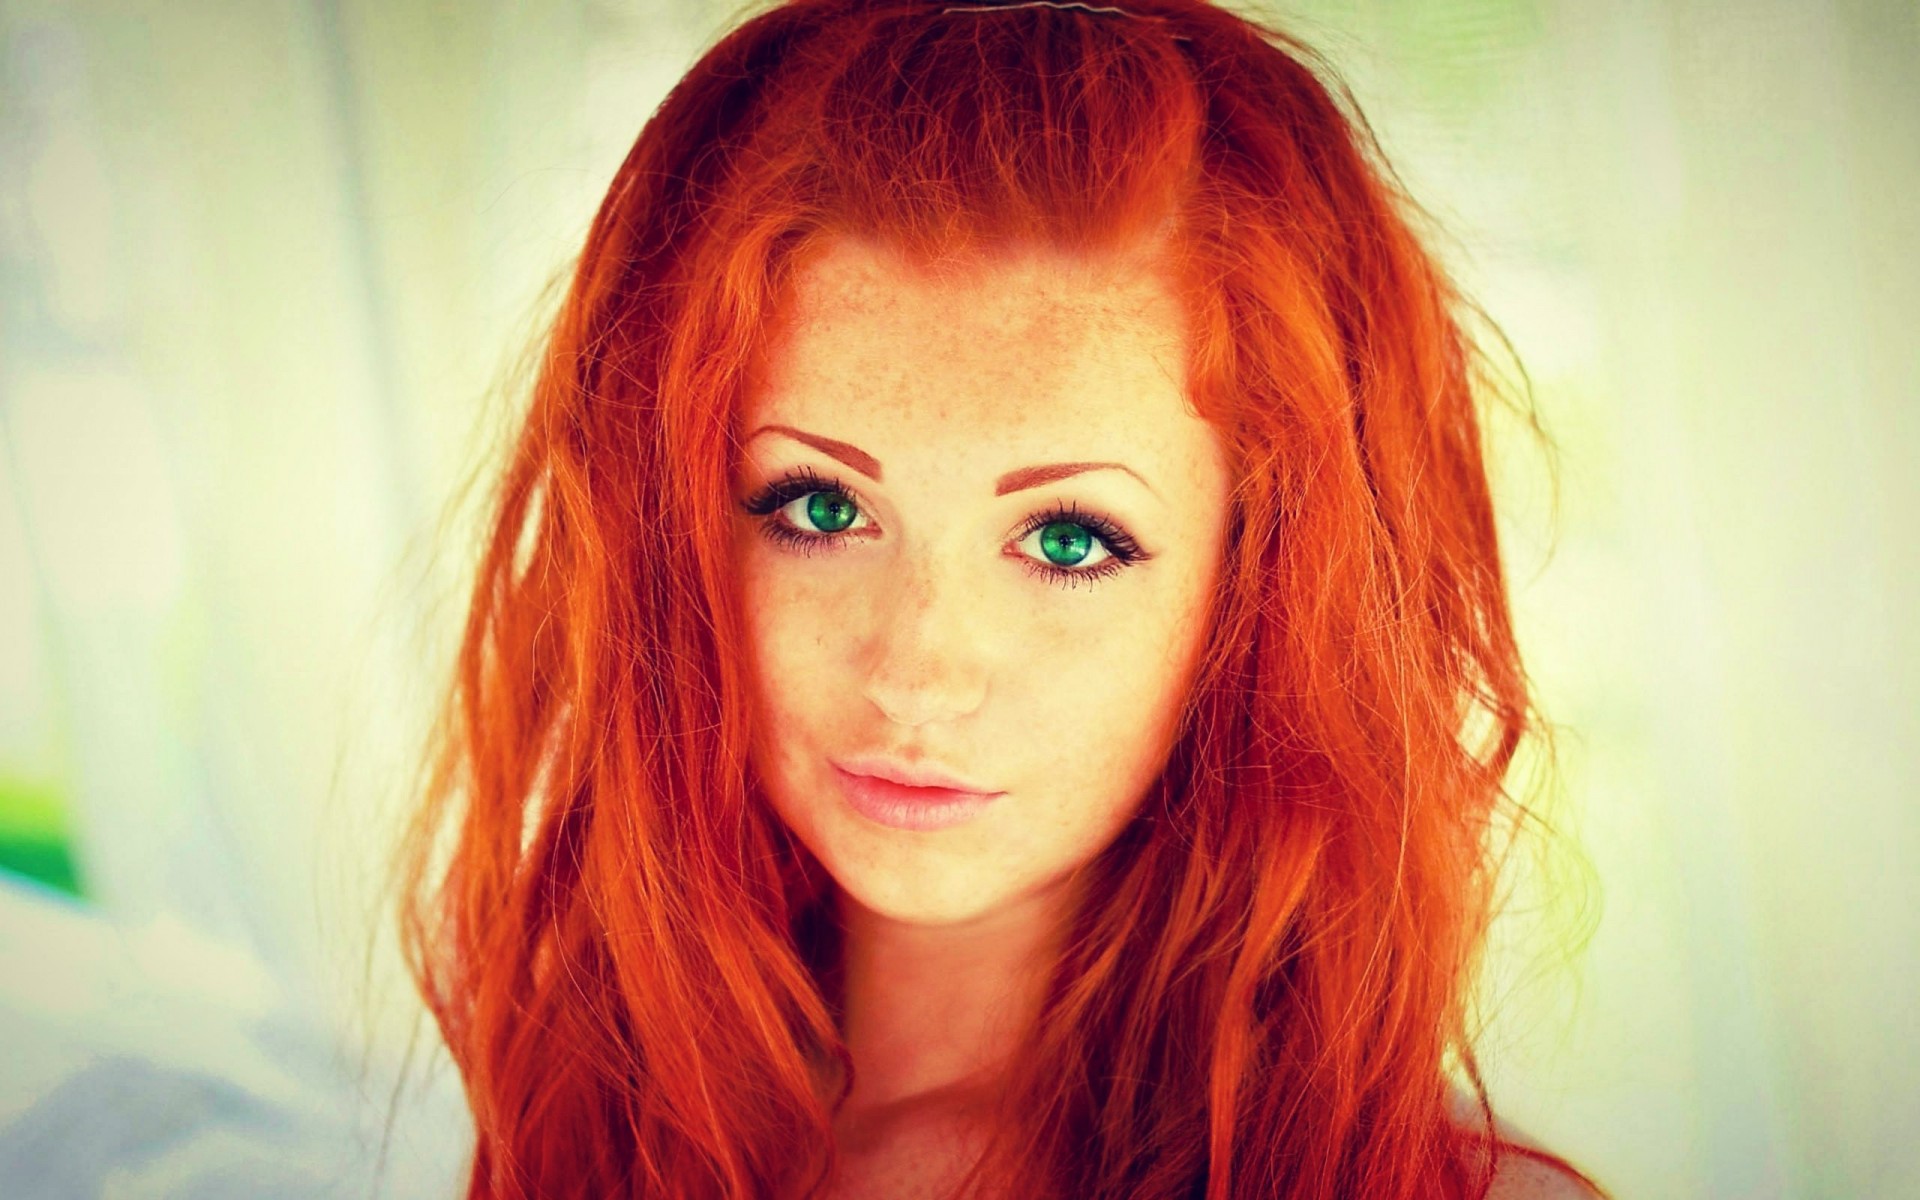 Red-haired, green-eyed girl wallpapers and images - wallpapers